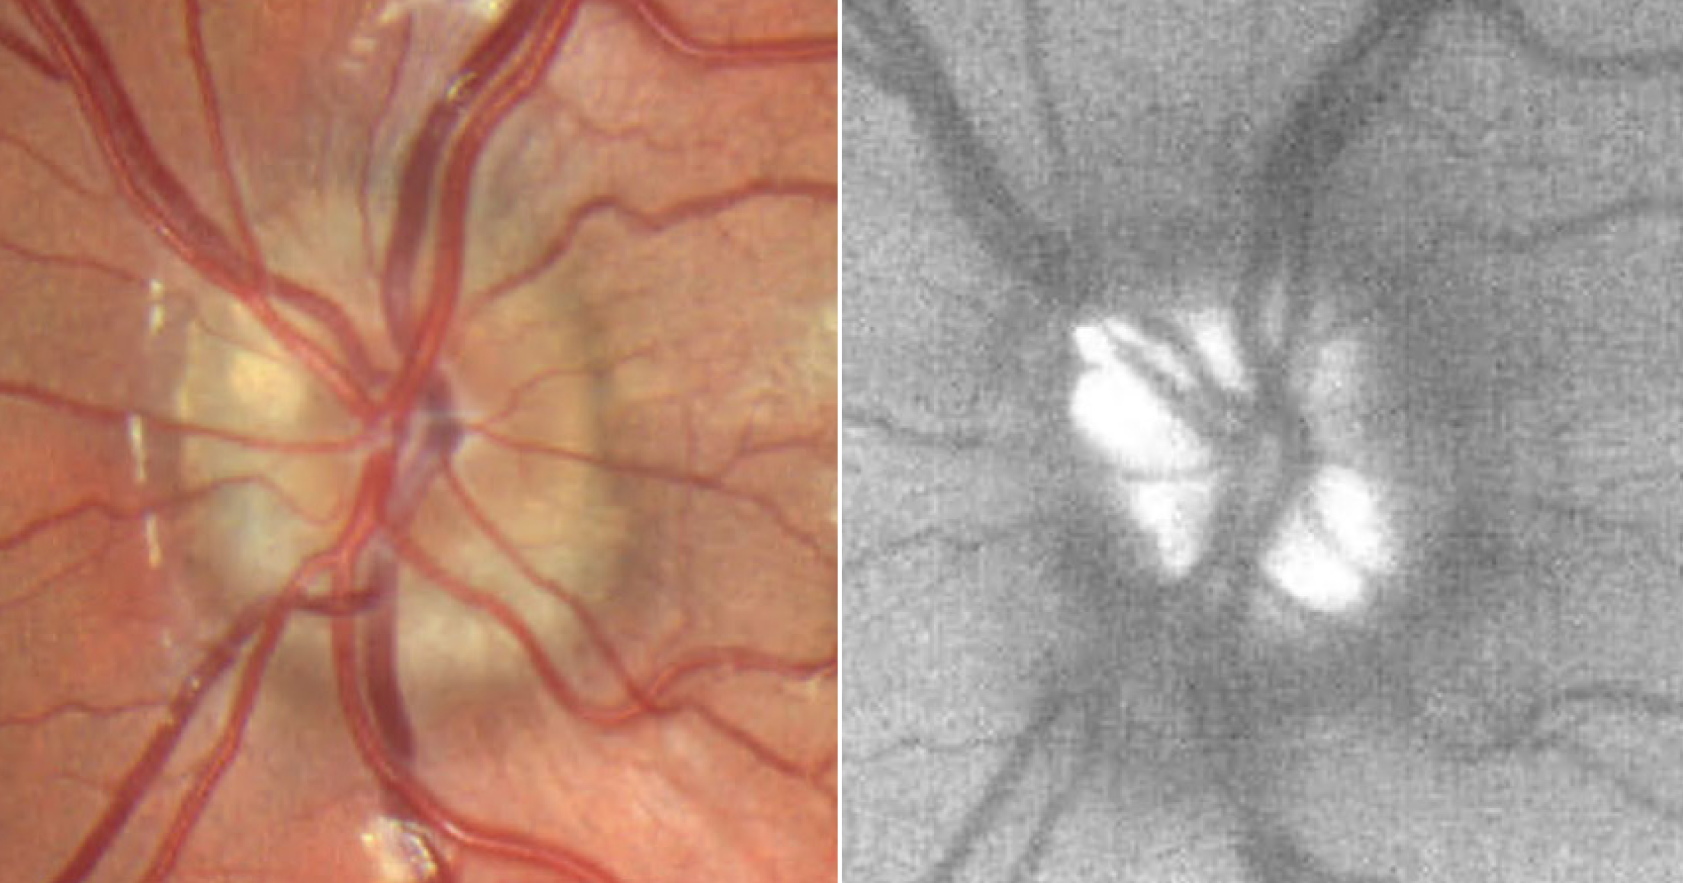 Optic disc drusen could signify a patient at risk for nonarteritic AION.